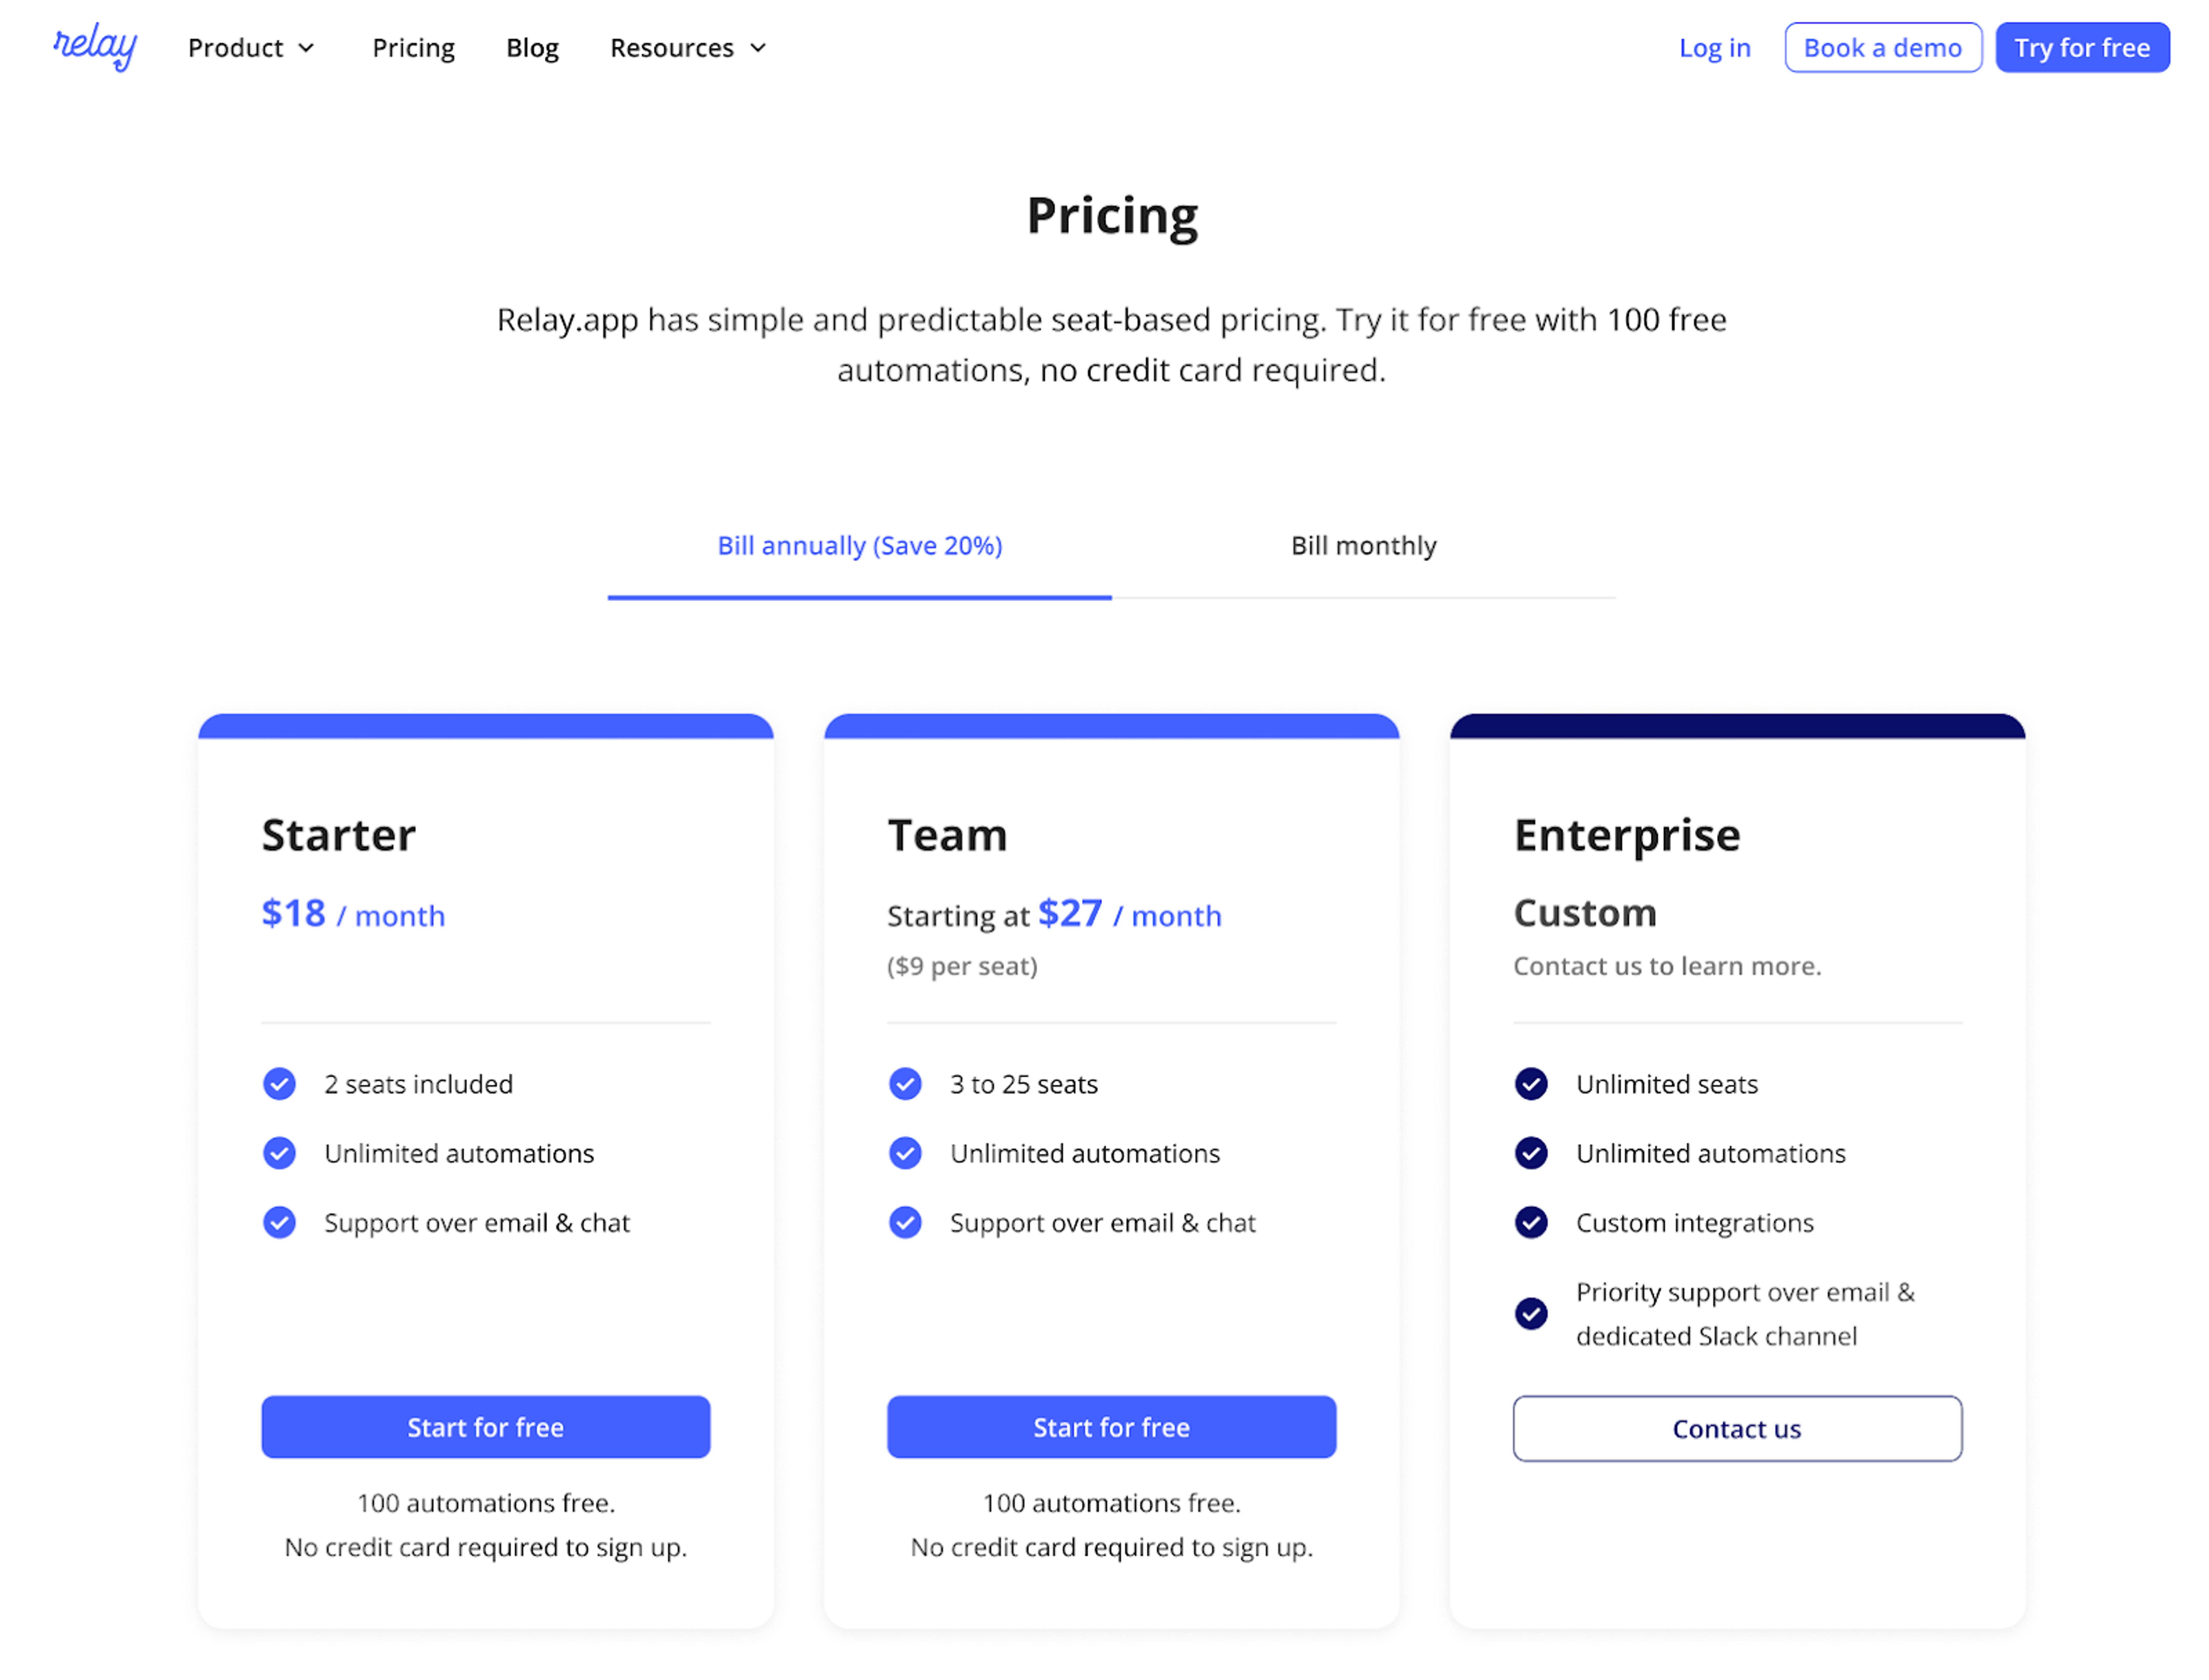 Relay.app's pricing page